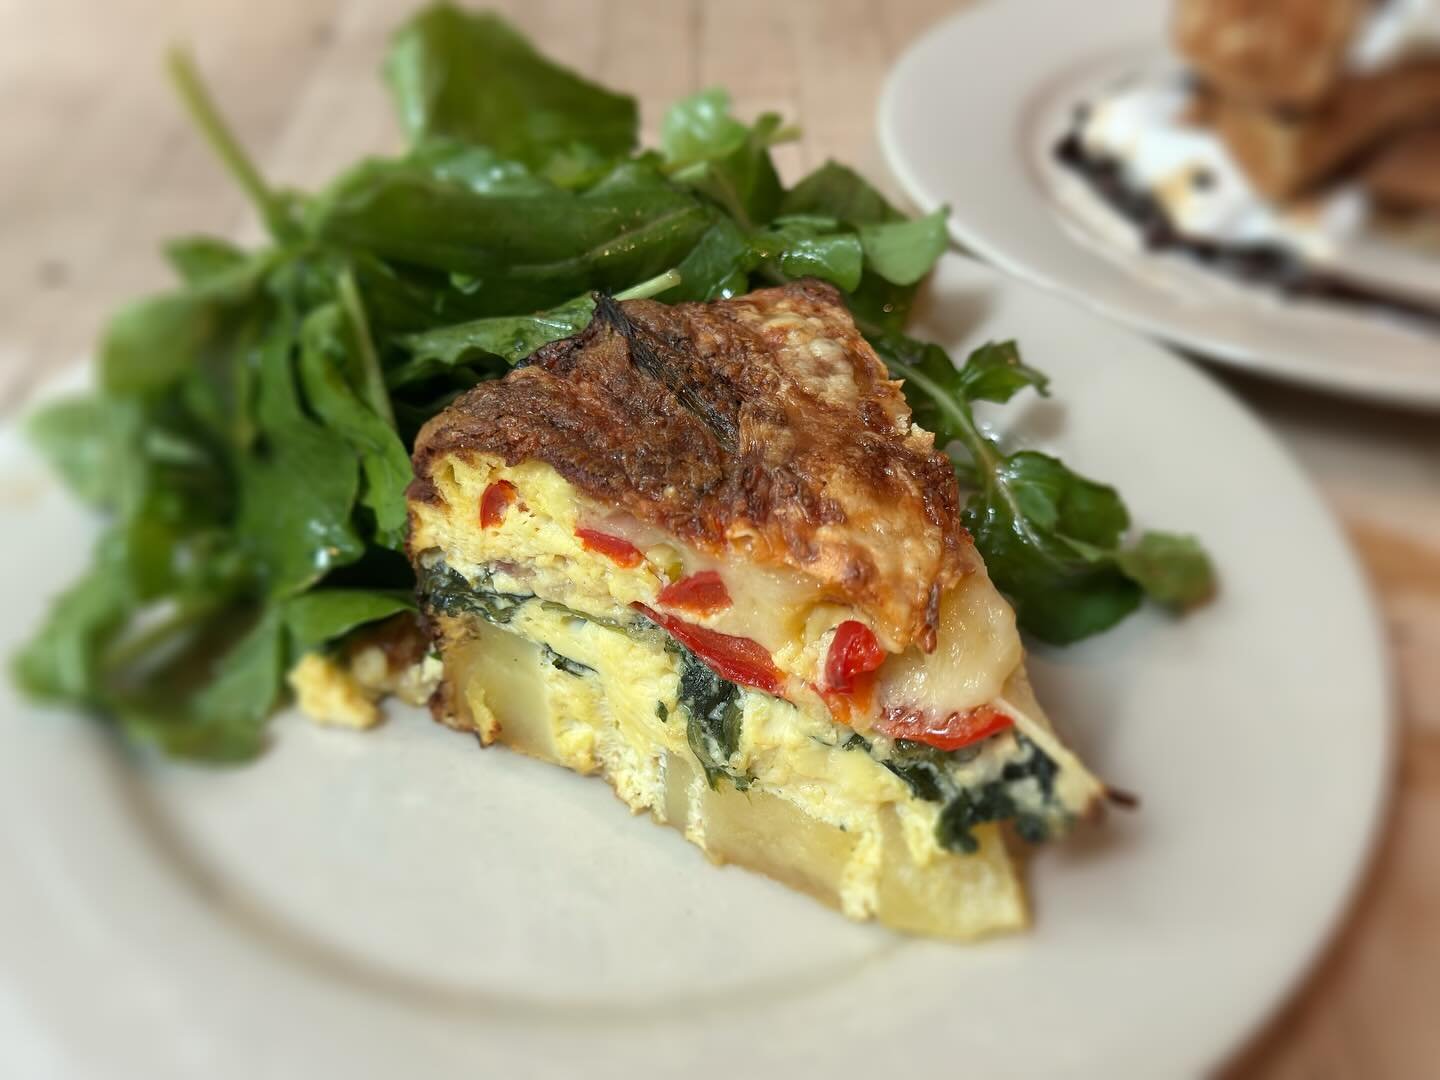 A little something for everyone this weekend! Country Ham Frittata, with swiss cheese, spinach, red peppers, potatoes, green onion, arugula salad . . . or S&rsquo;mores Waffle, graham waffle, marshmallow whip, chocolate. Special through Sunday. Doors